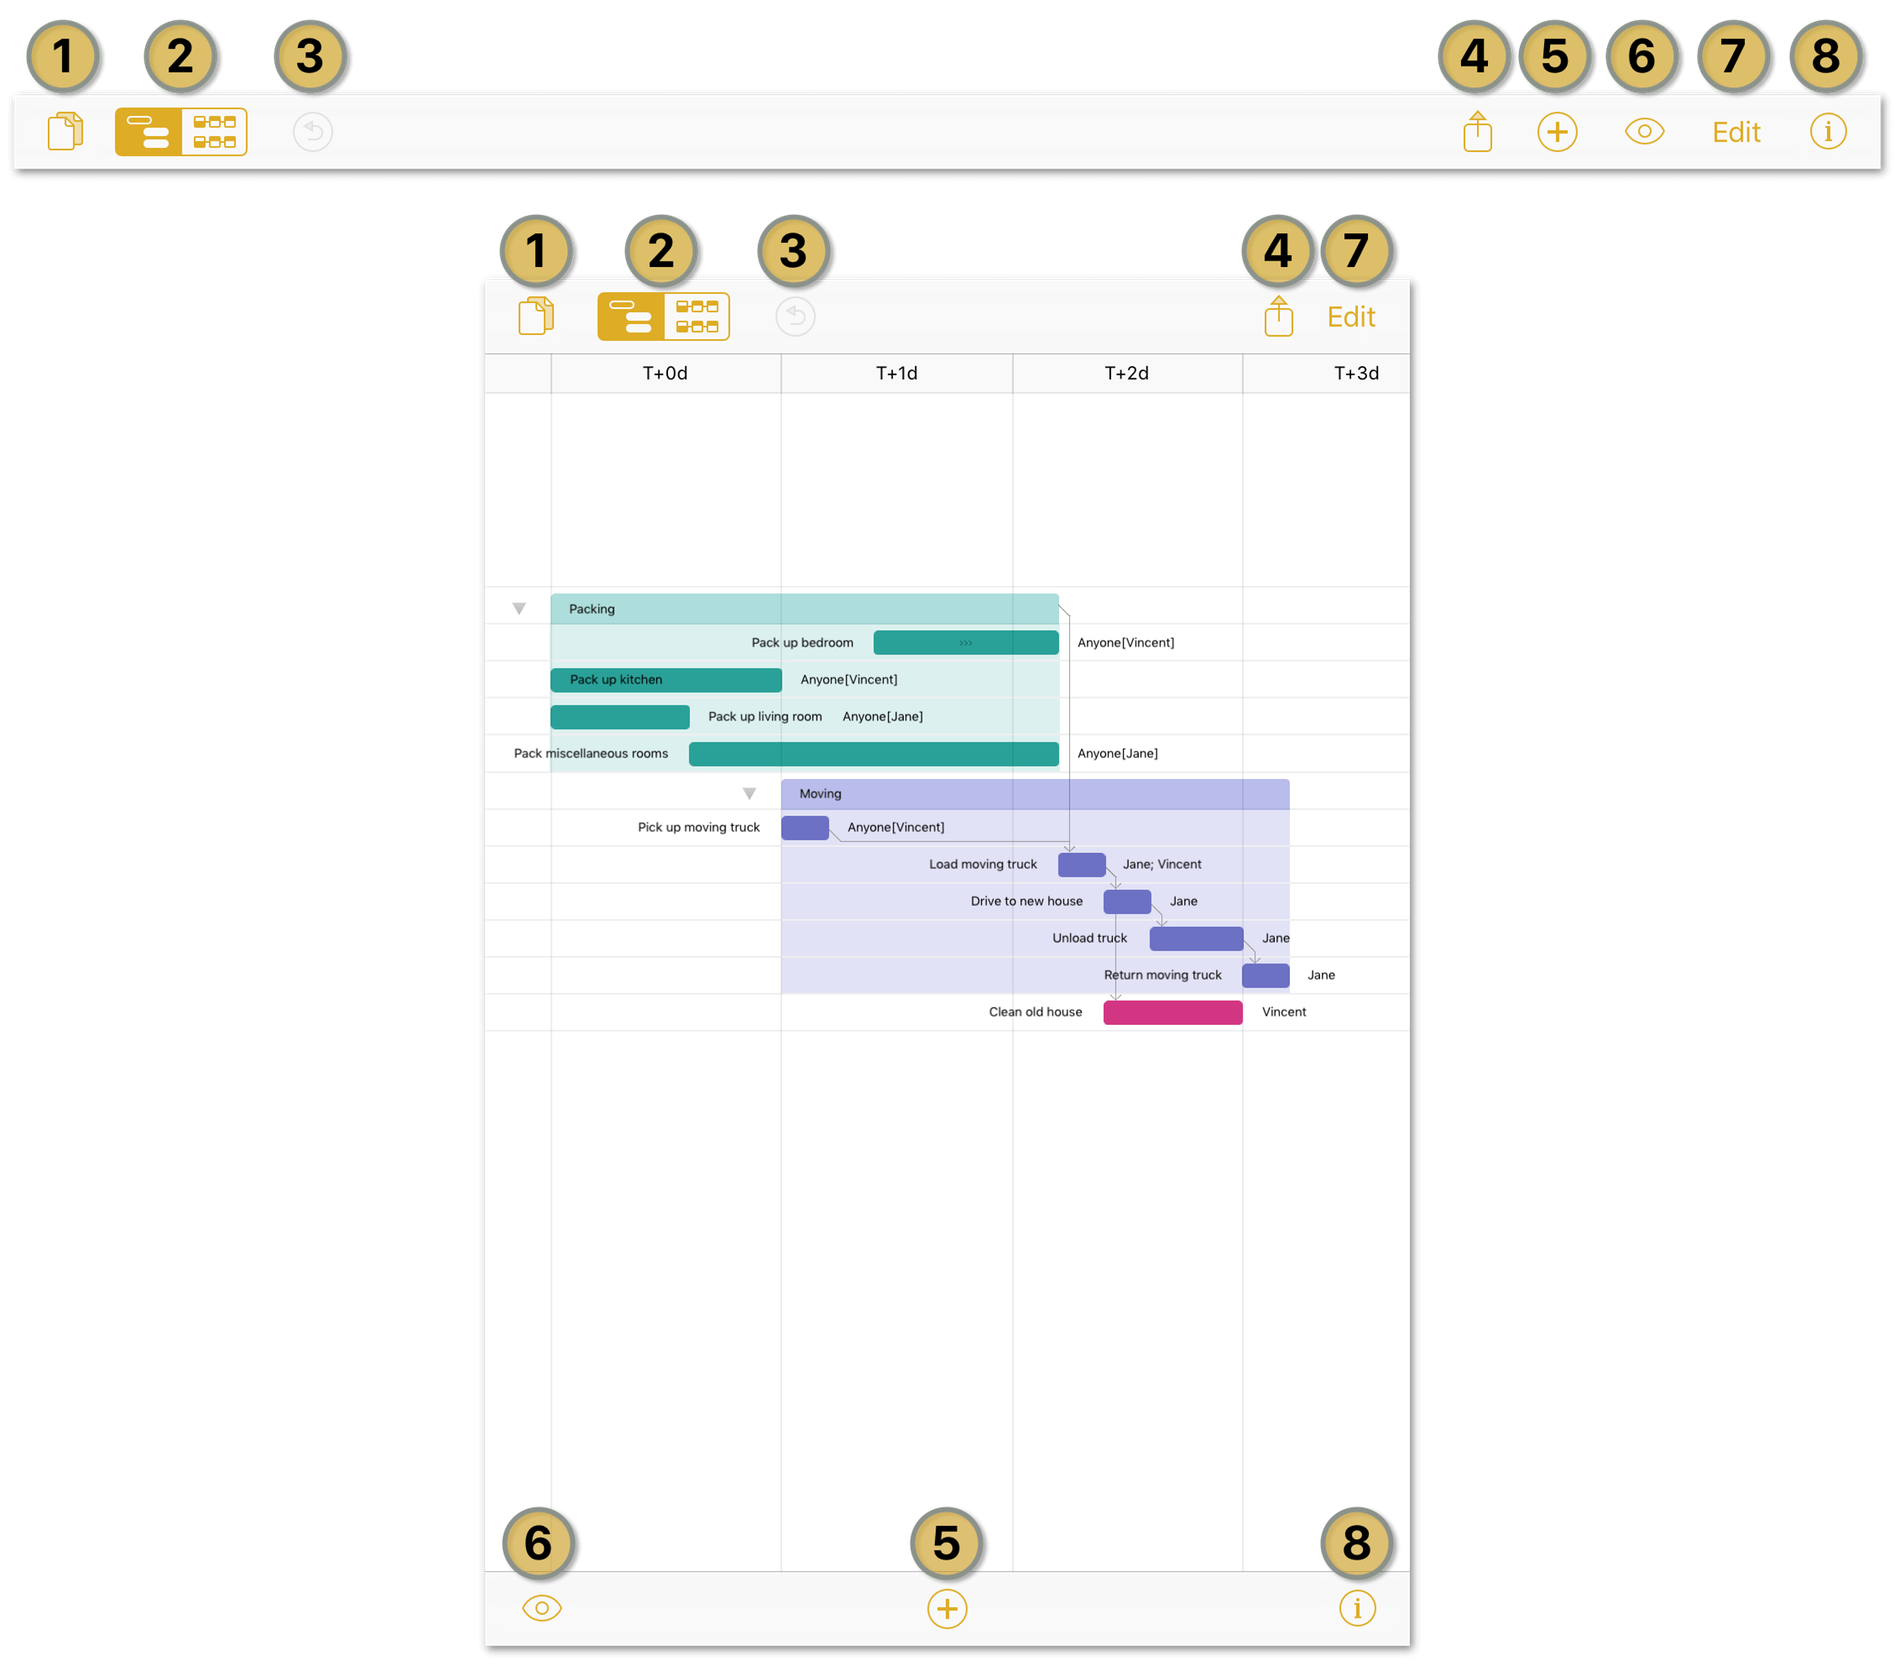 The project editor in OmniPlan 3 for iOS on larger devices.